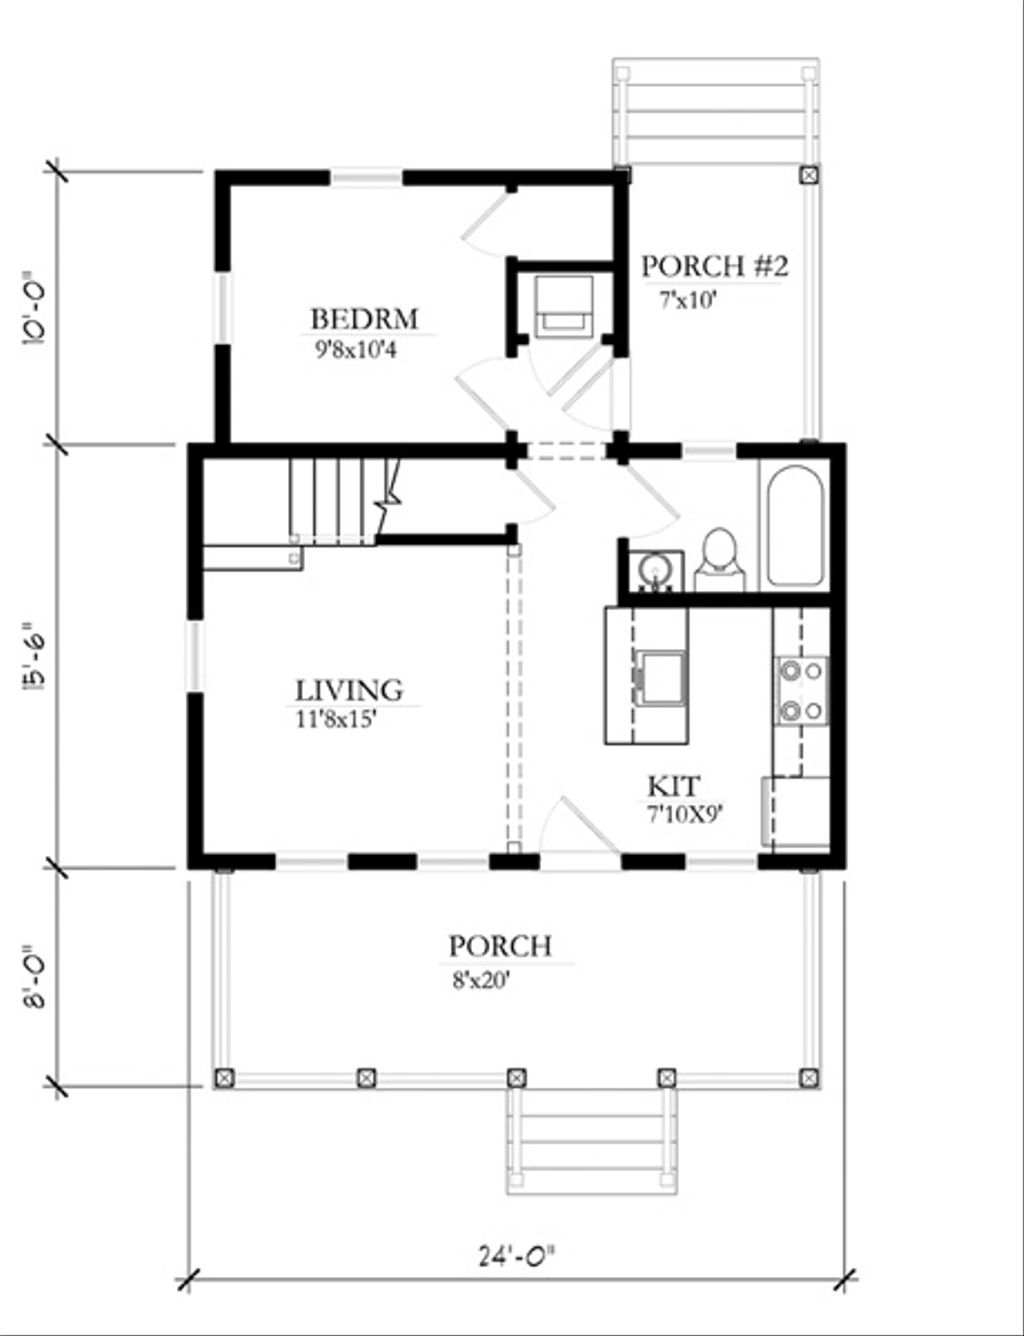 Cottage Style House Plan 2 Beds 1 Baths 697 Sq Ft Plan 514 10